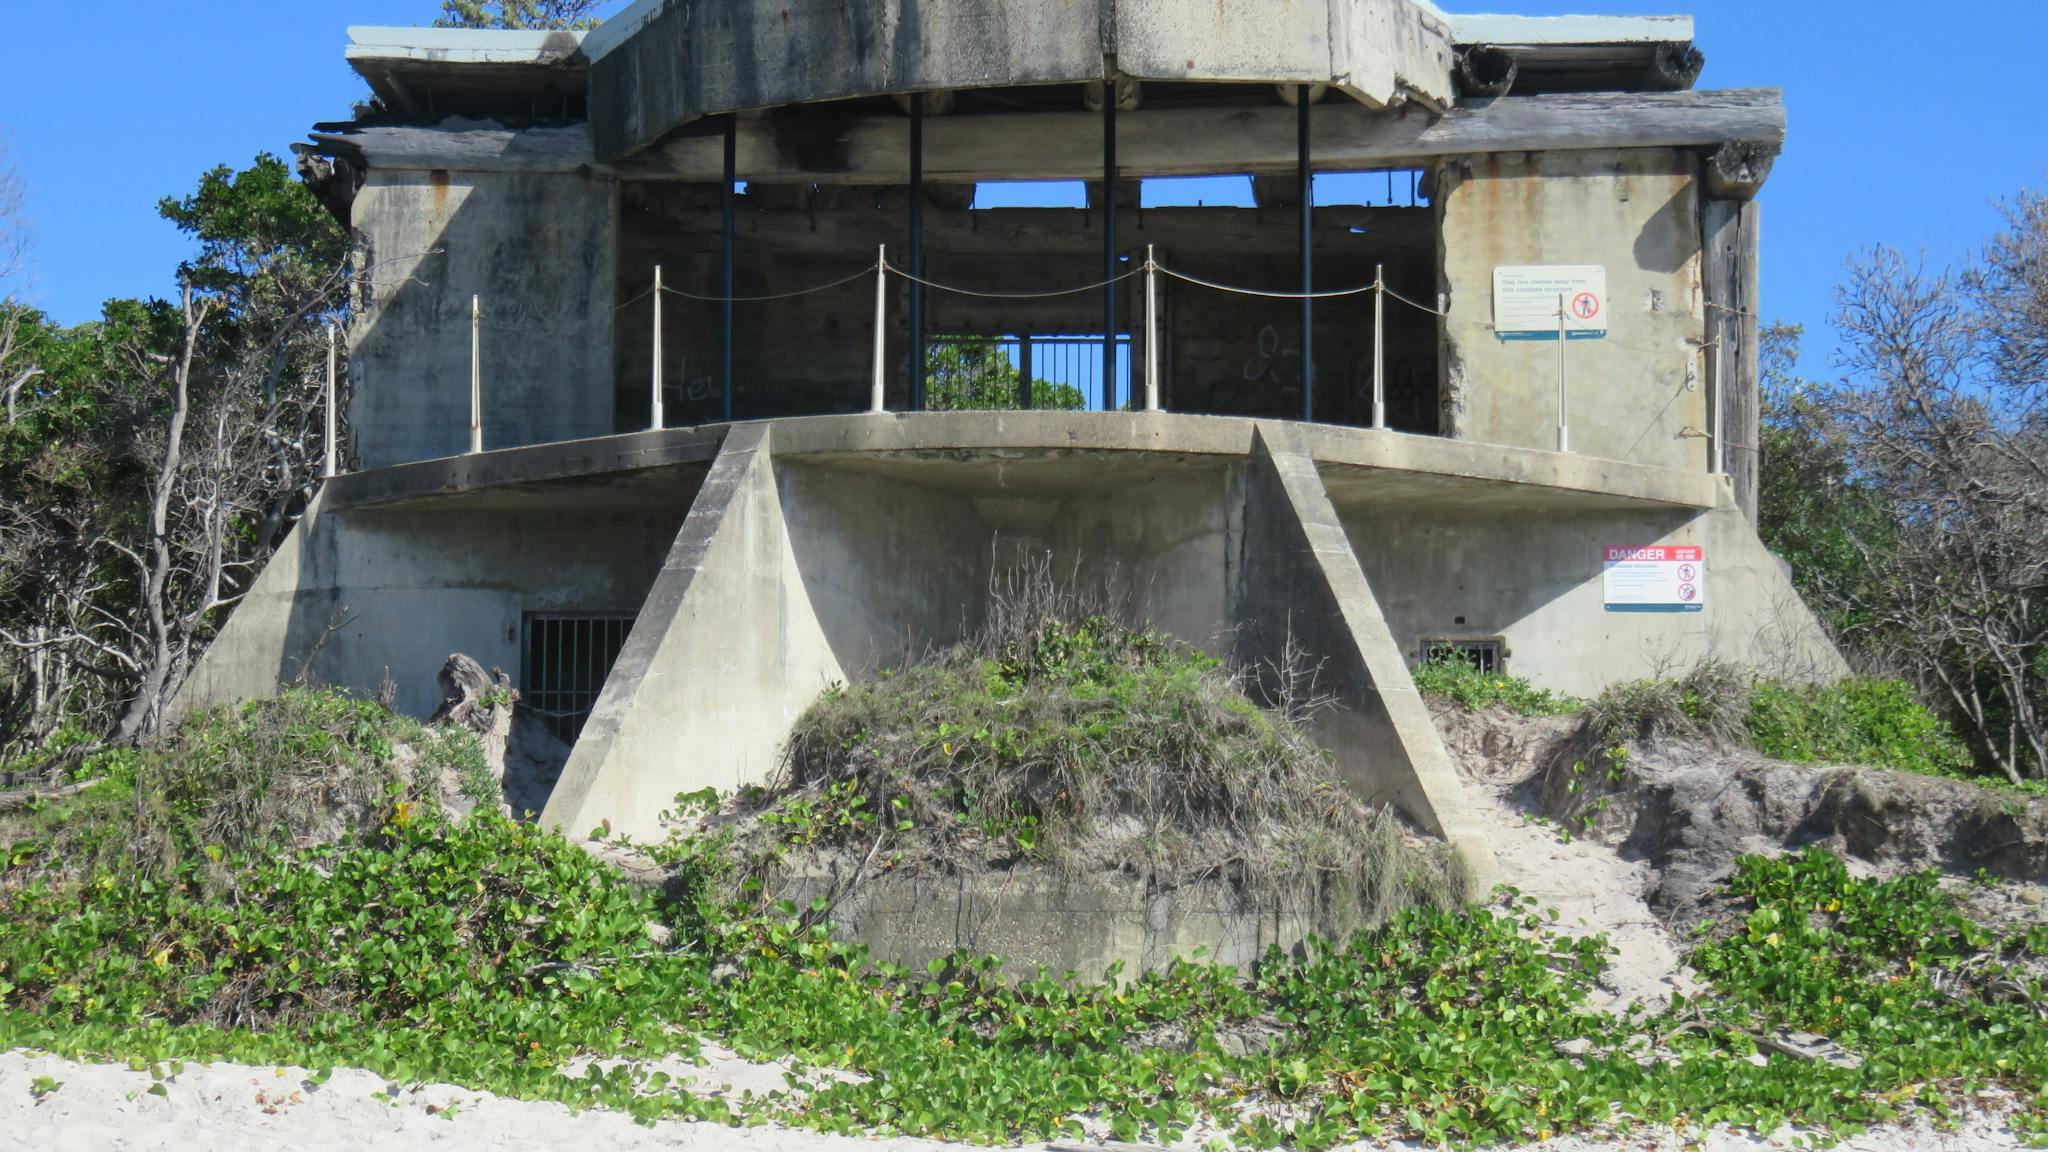 Concrete gun emplacement sits on sandy beach backed by coastal plants.